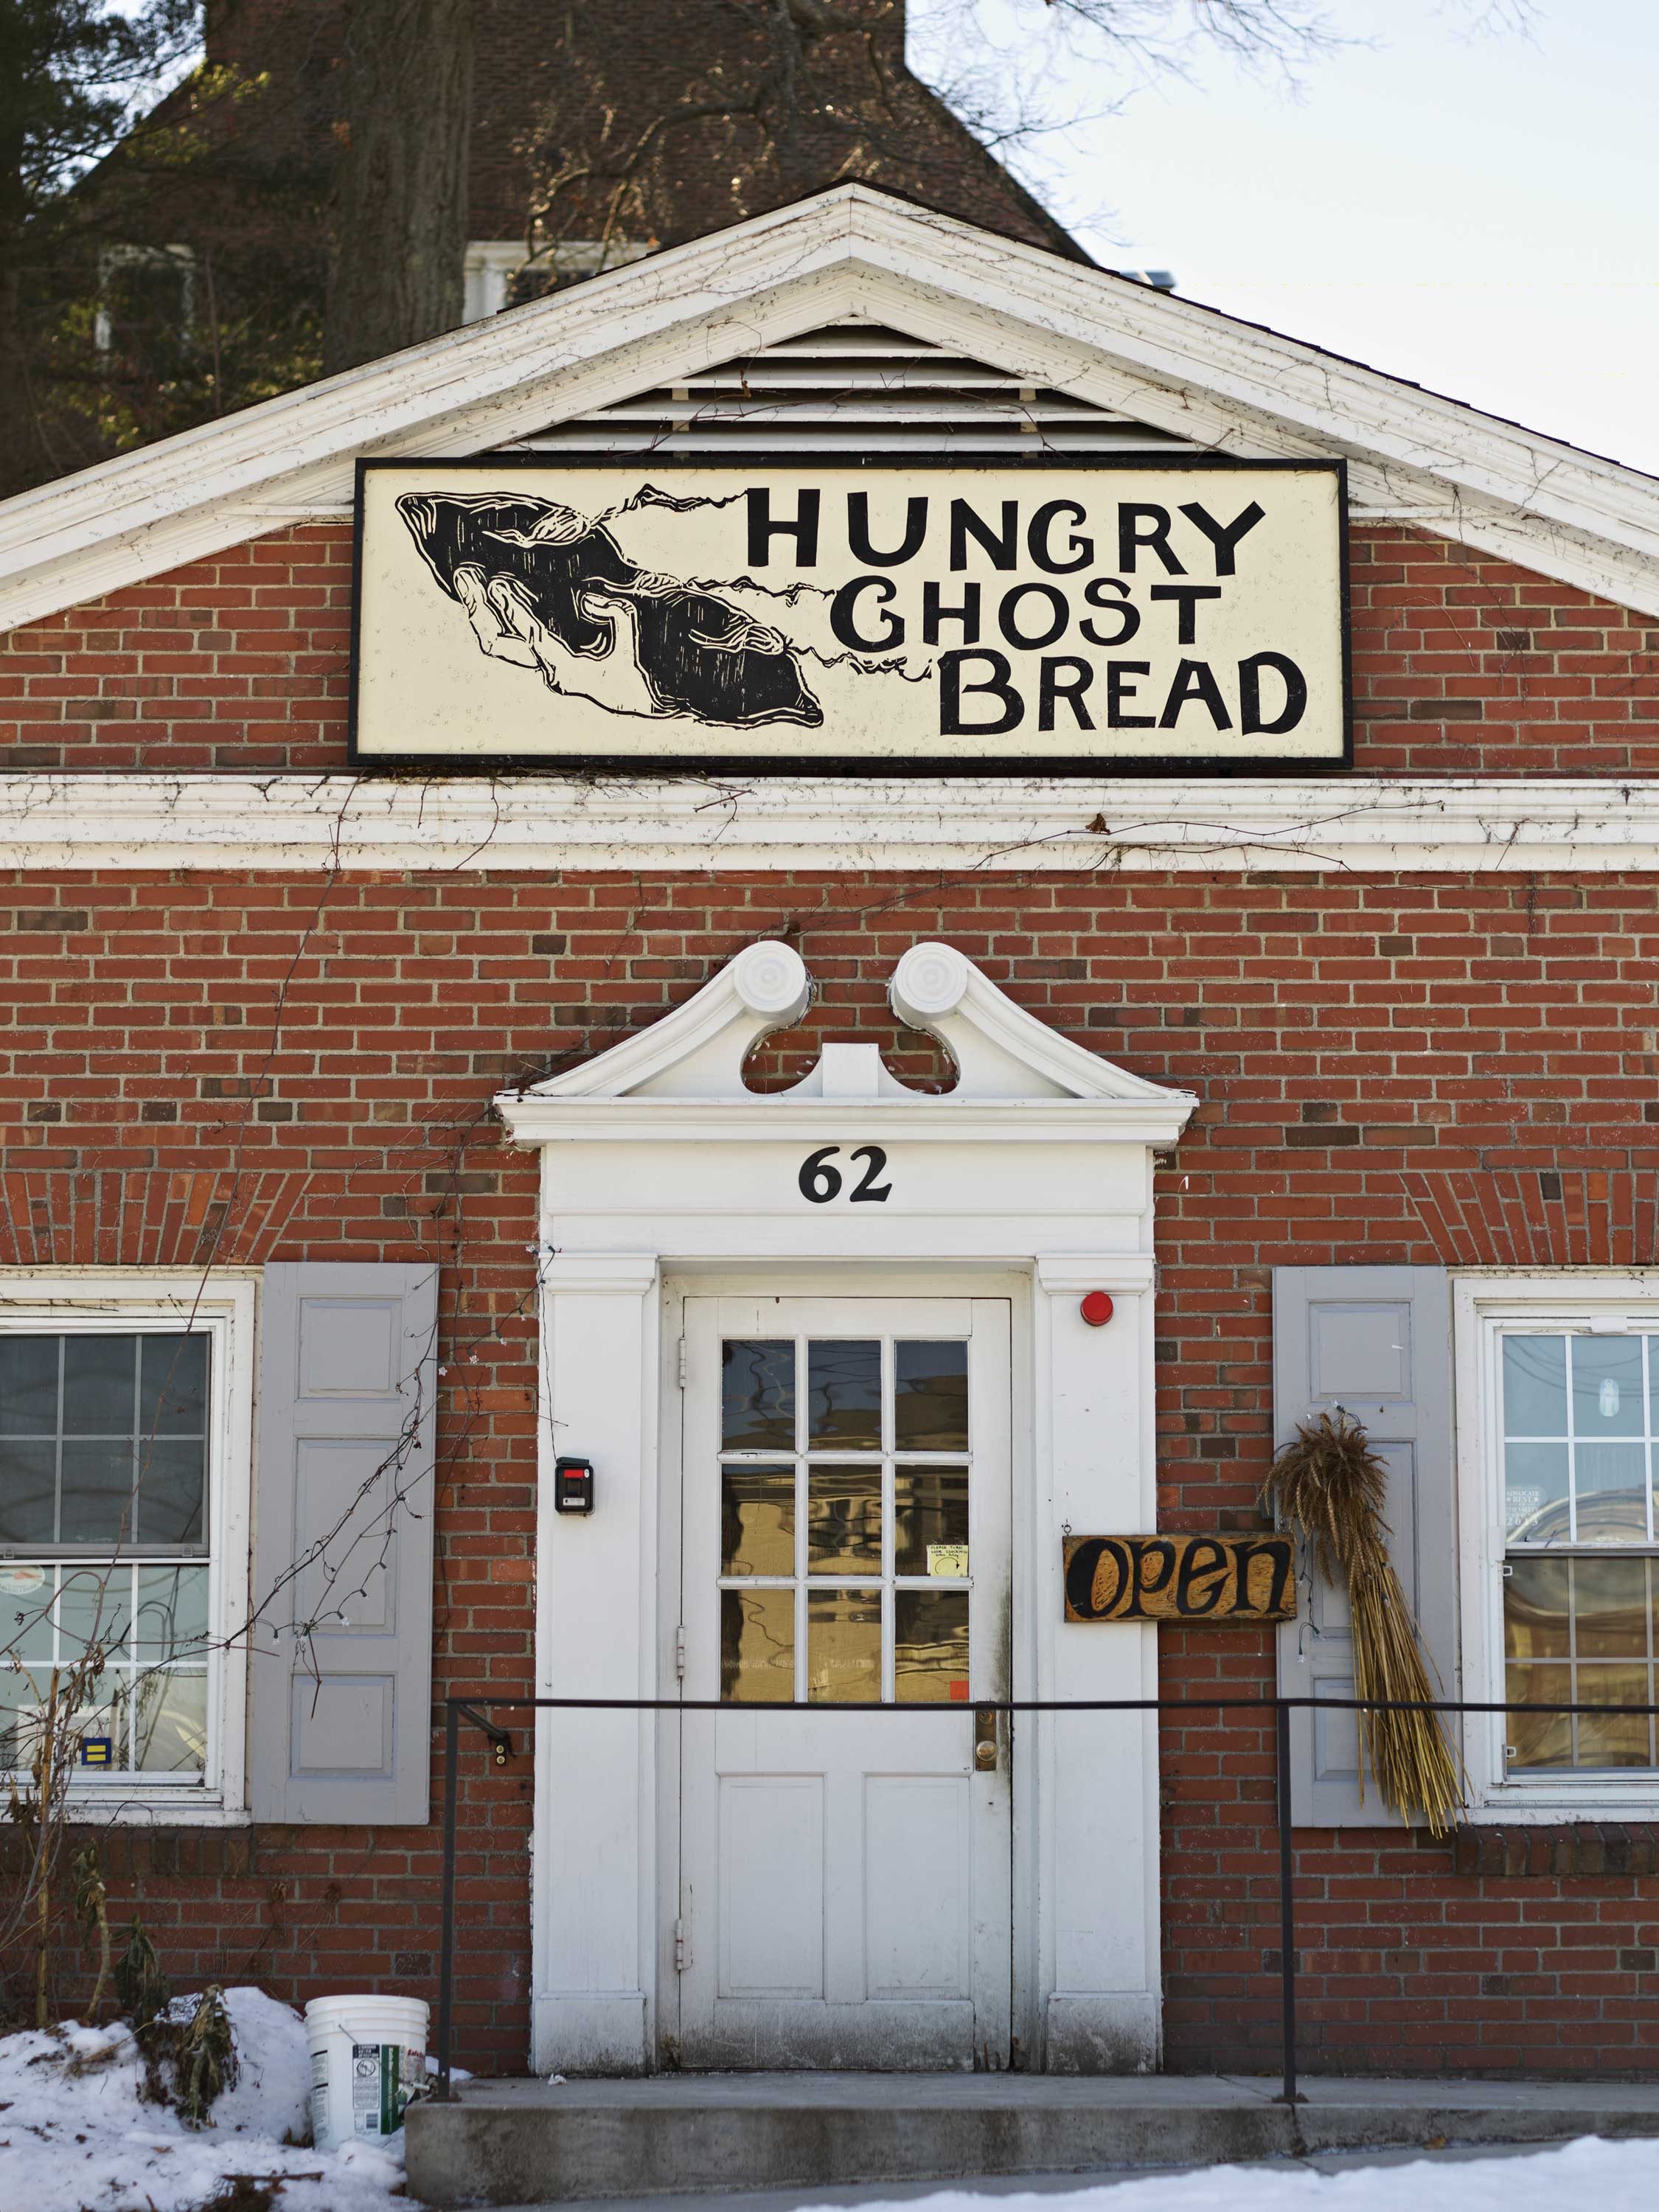 Hungry Ghost Bred sits on a small hill near downtown Northampton, Massachusetts.